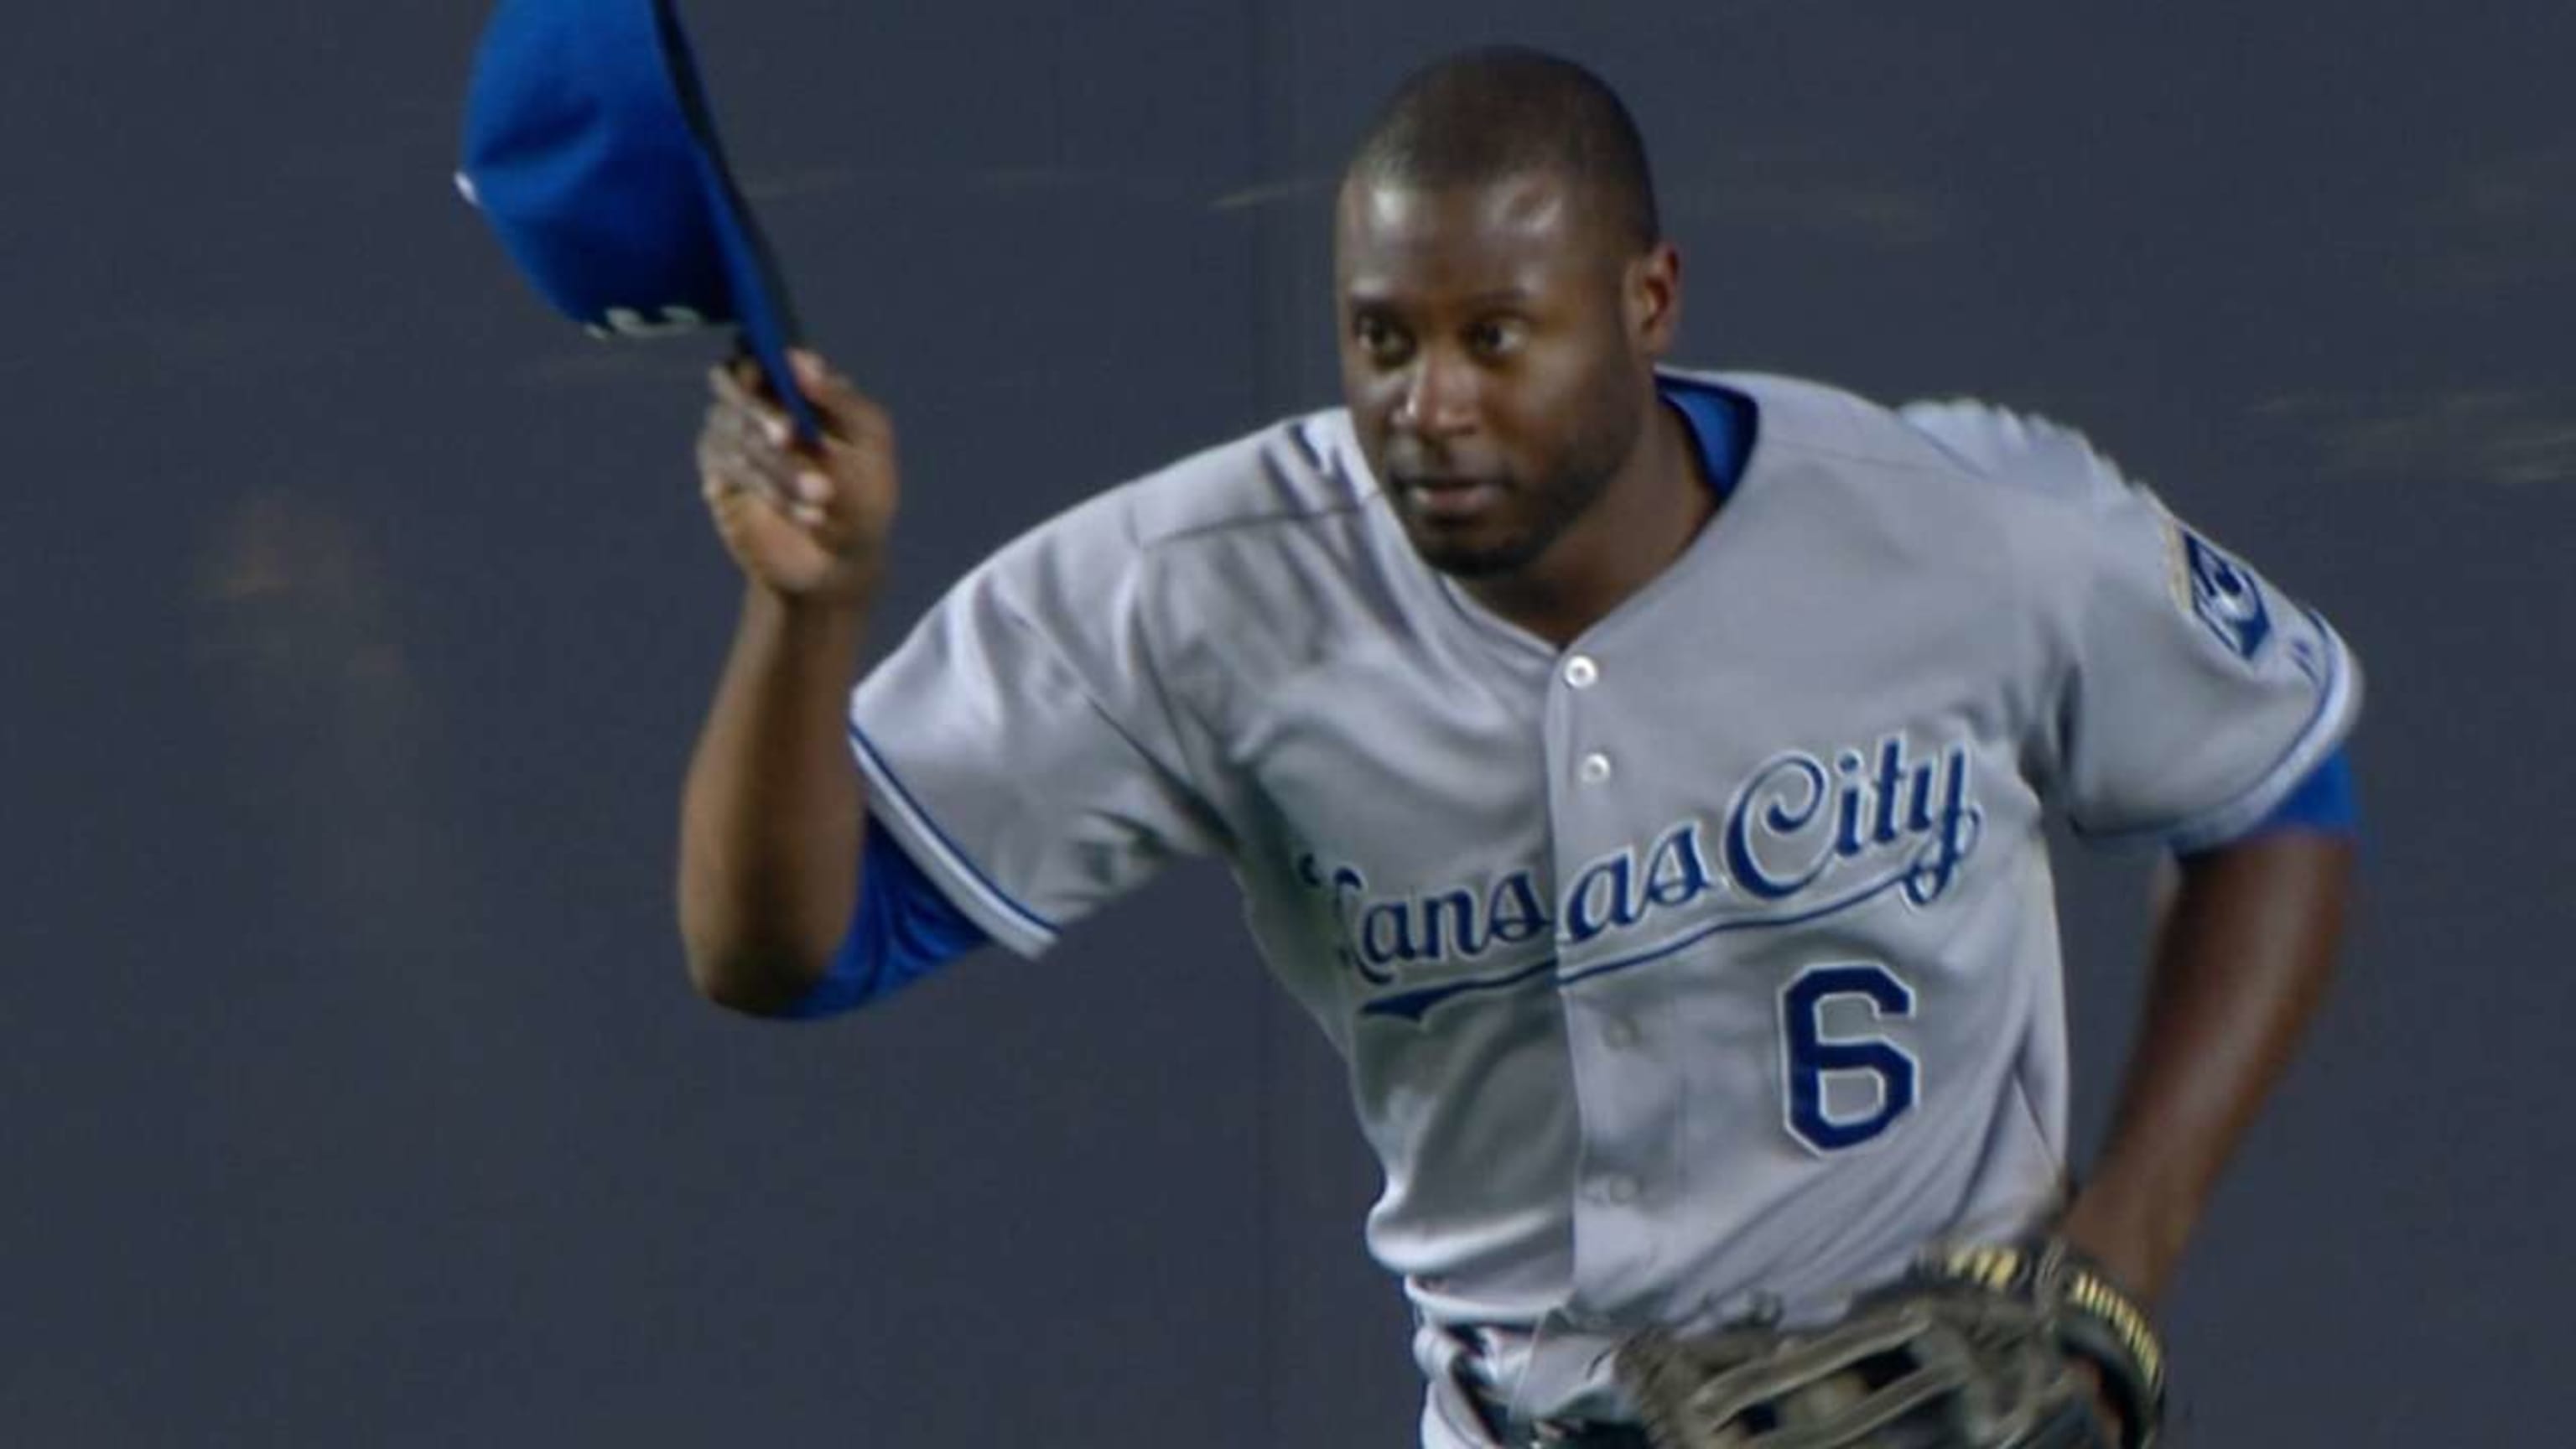 KC Royals Lorenzo Cain: a Gold Glover before new rule